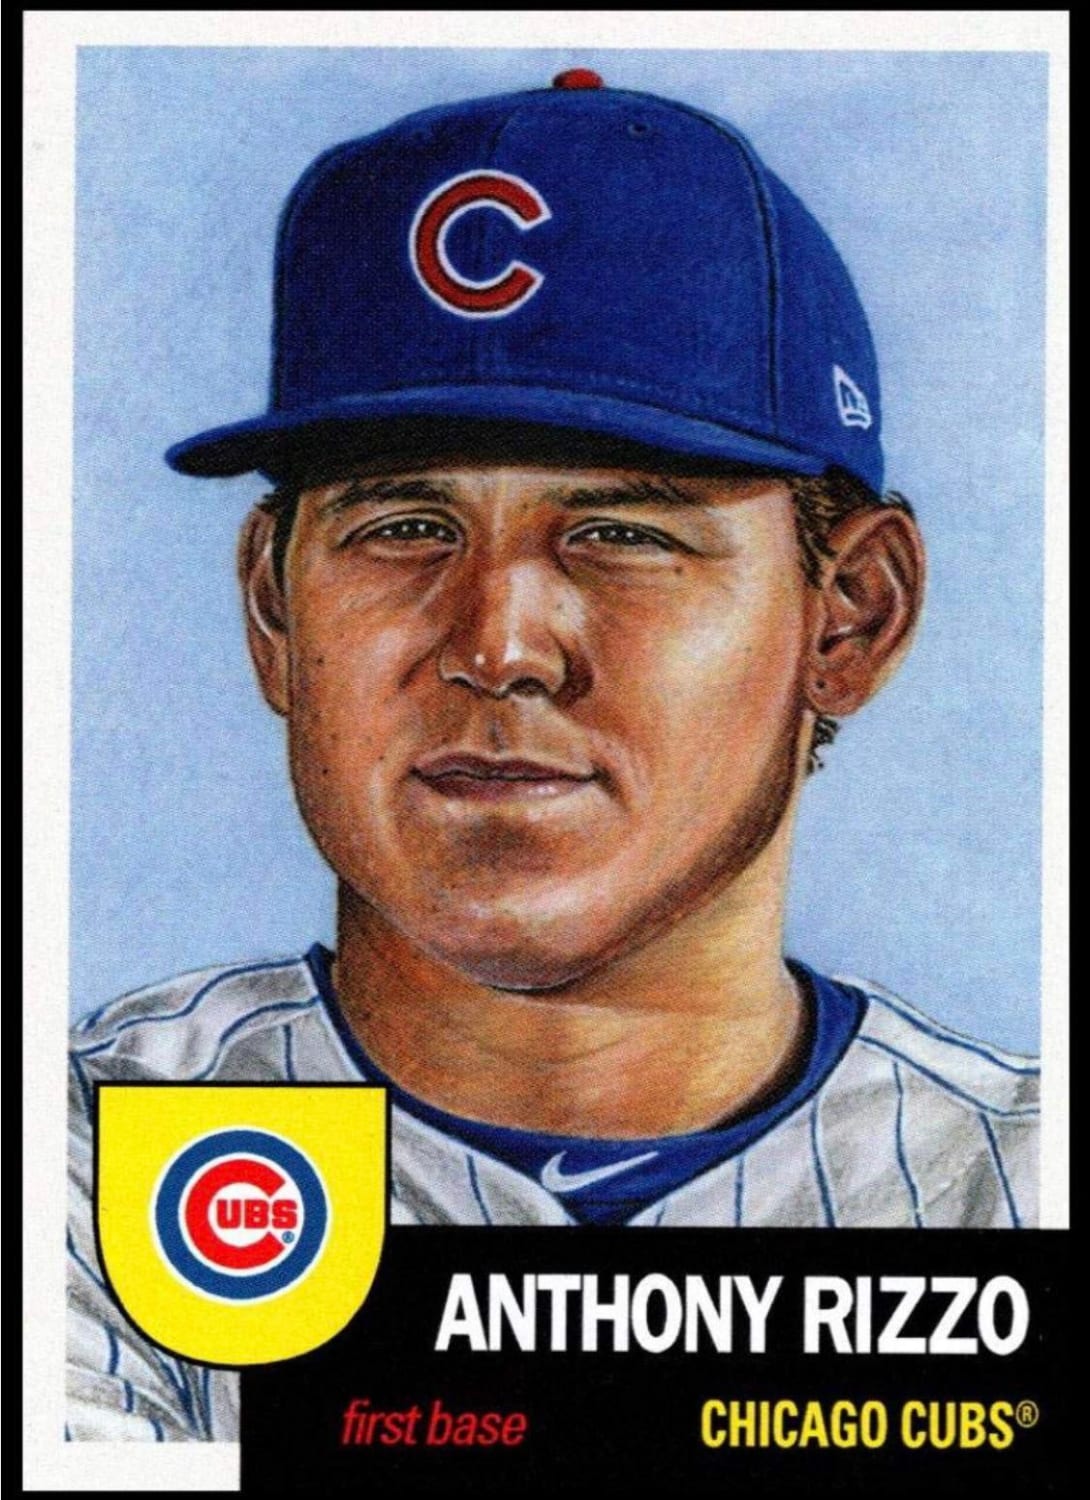 Does anyone else think Topps made Rizzo look like he likes them “ French fried potaters”?